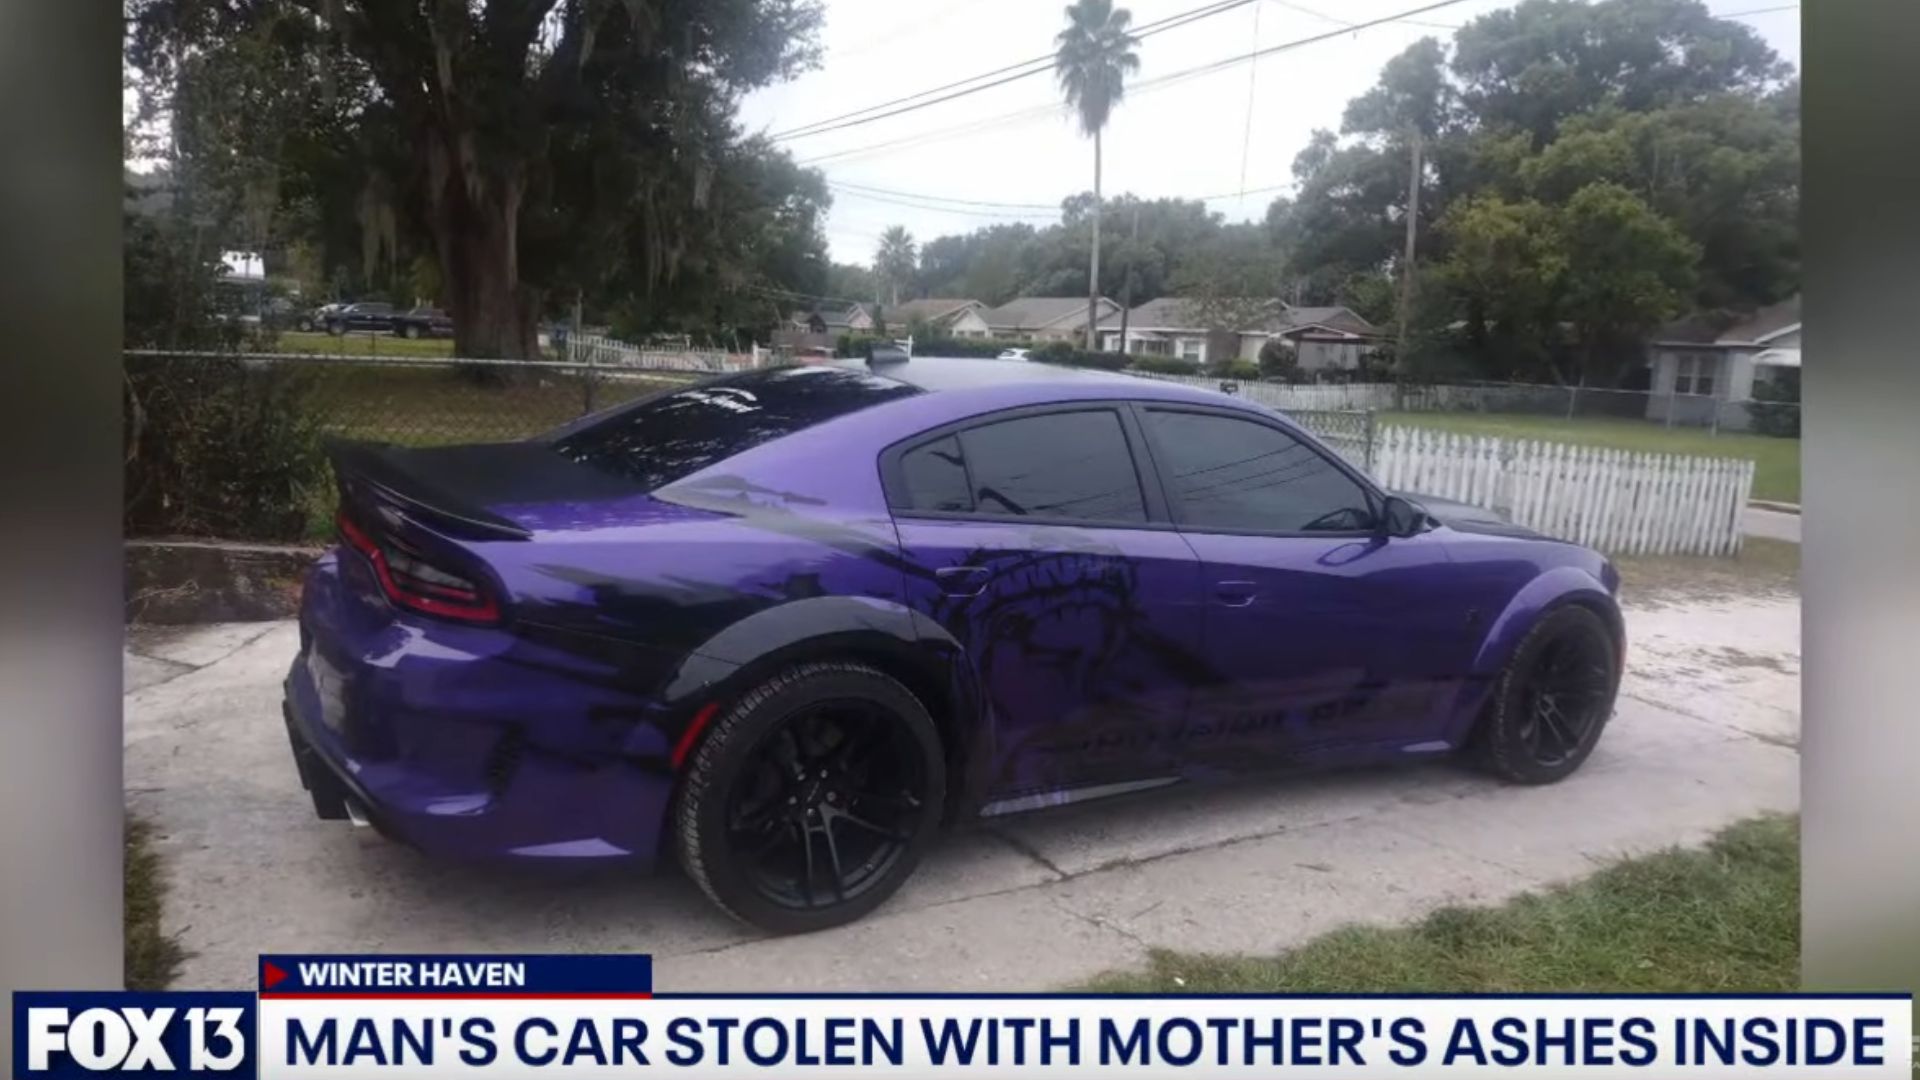 Thieves Steal Dodge Hellcat With Mother’s Ashes Inside